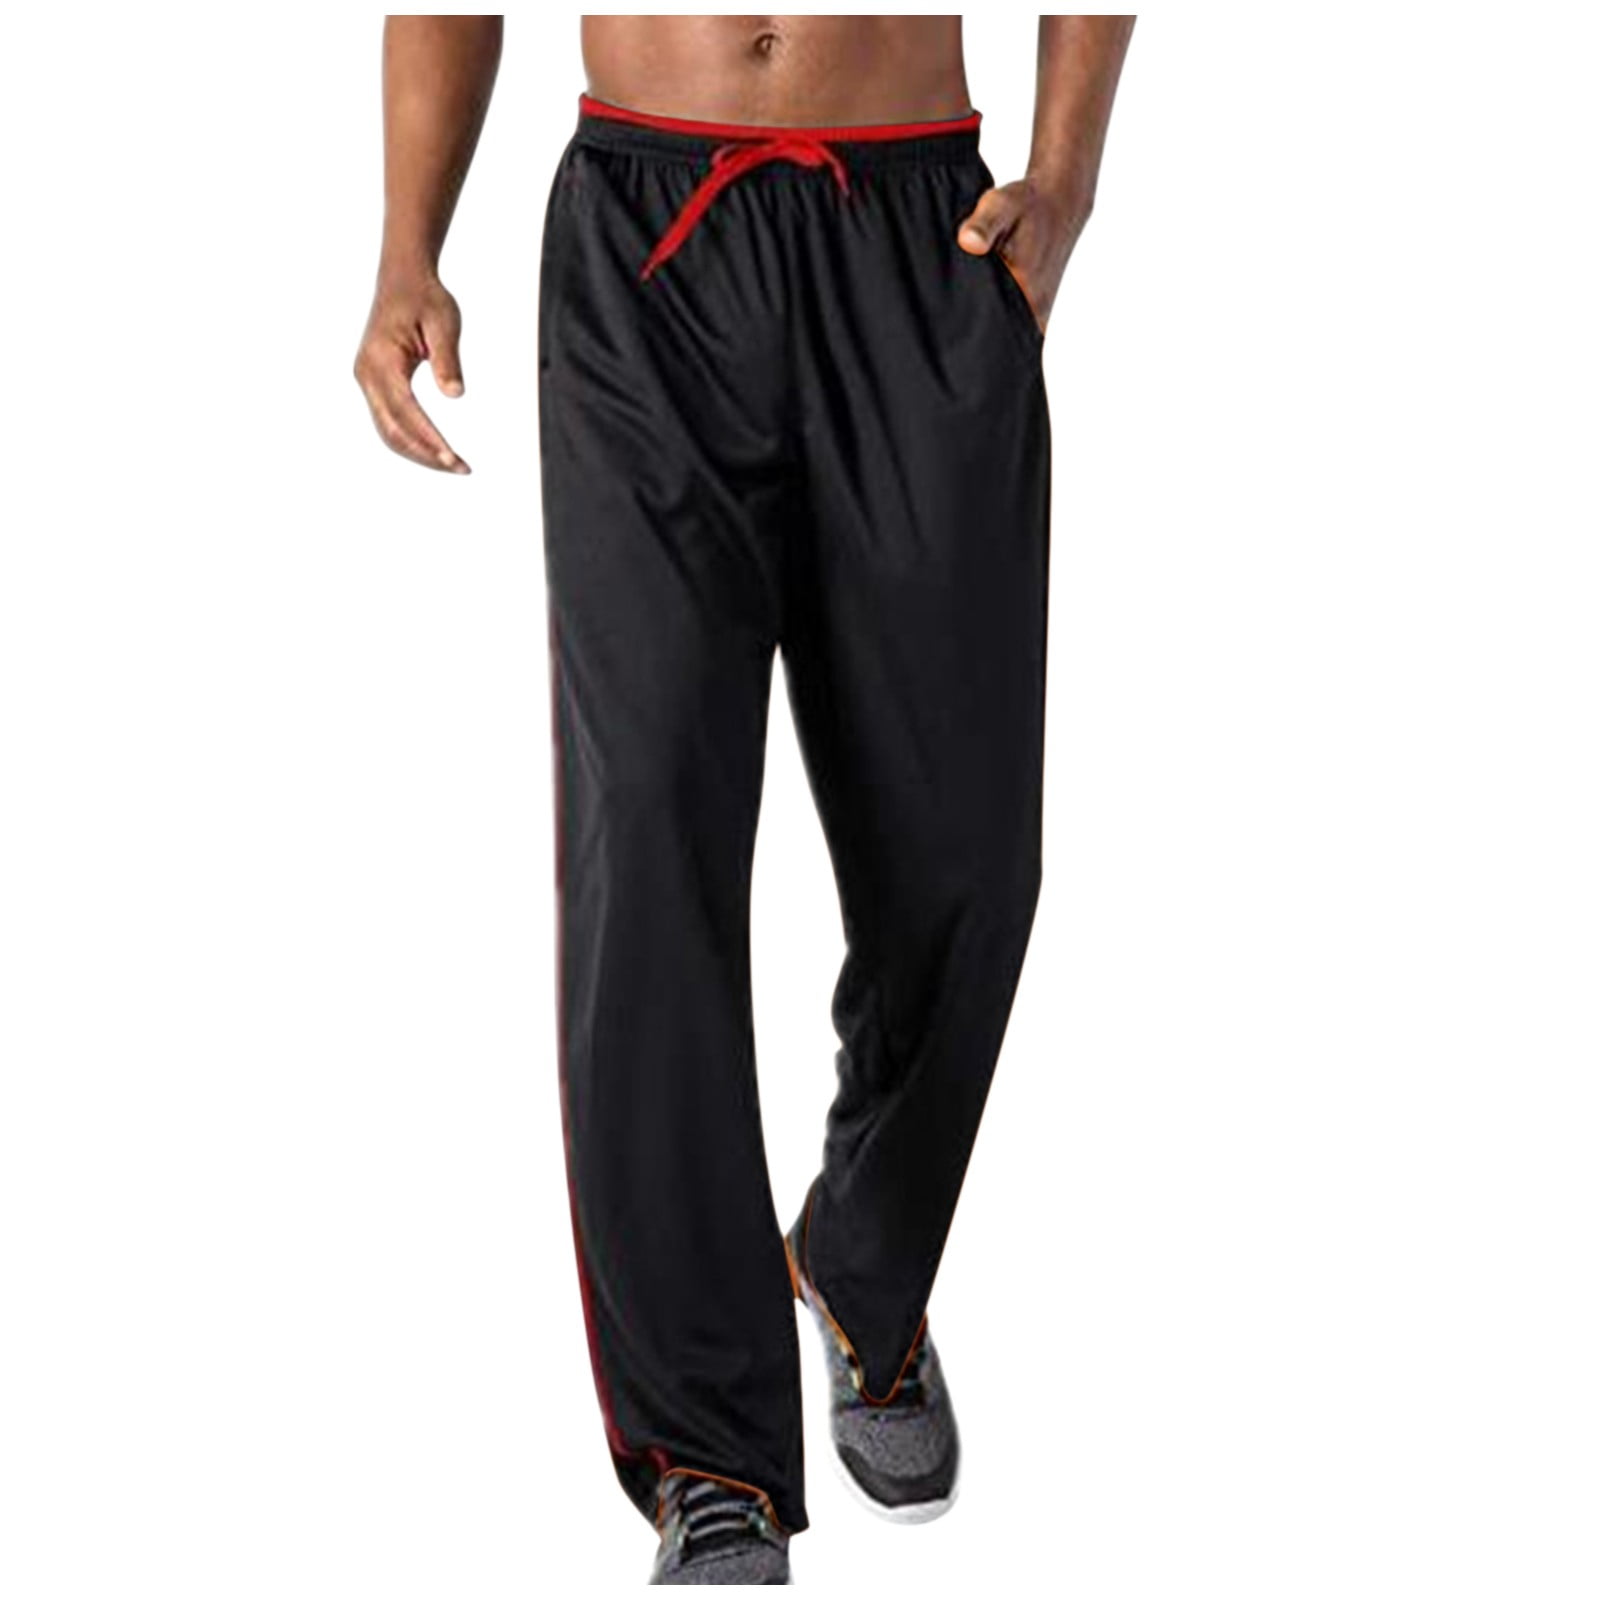 FoxQ Men's Sports Joggers Sweatpants with Pockets Athletic Running Casual Yoga Pants Loose Fit Straight Leg Open Bottom 